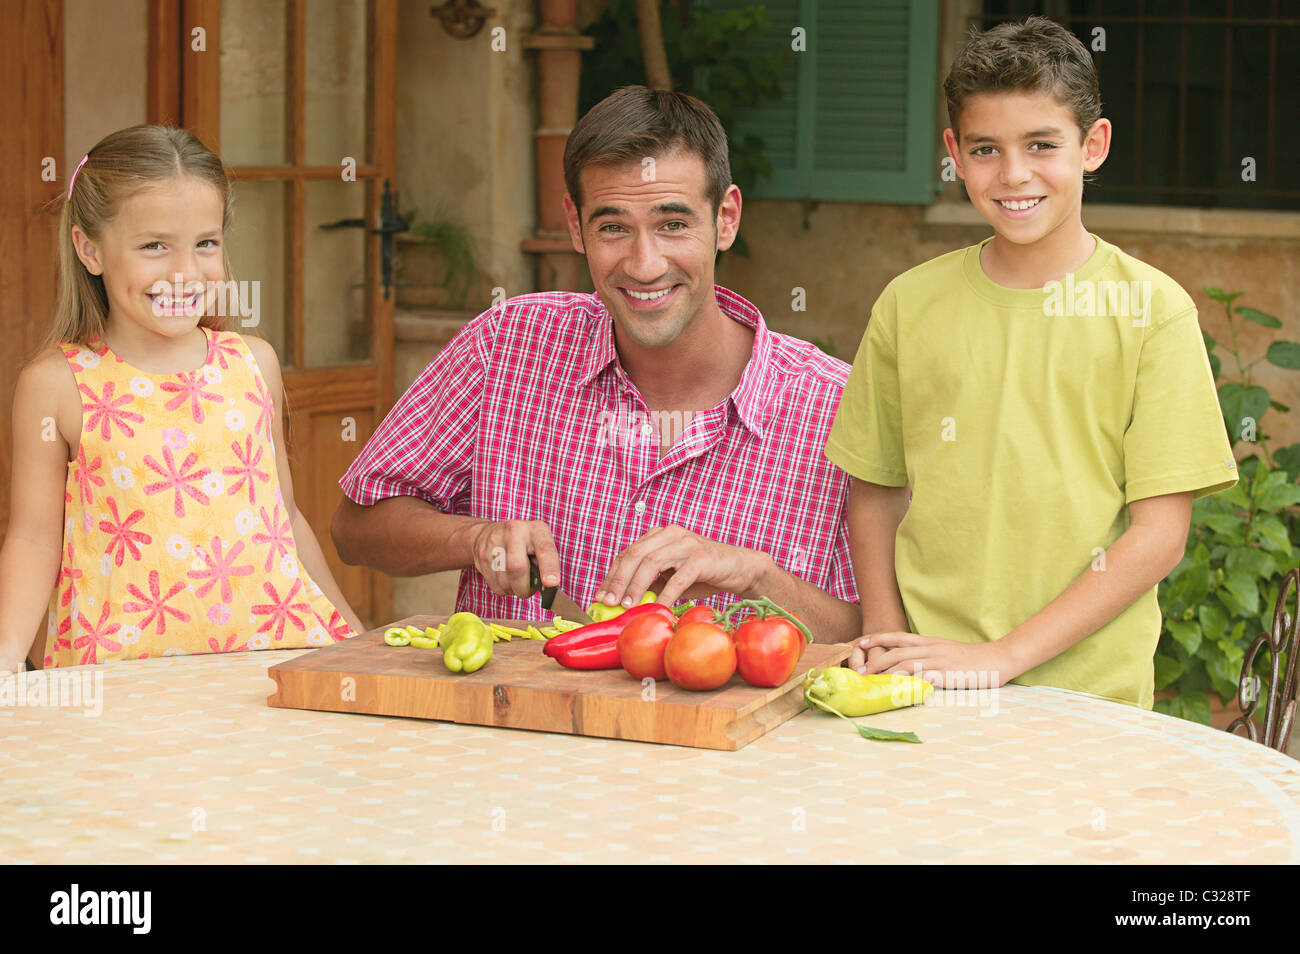 Children and father chopping vegetables outdoors Stock Photo